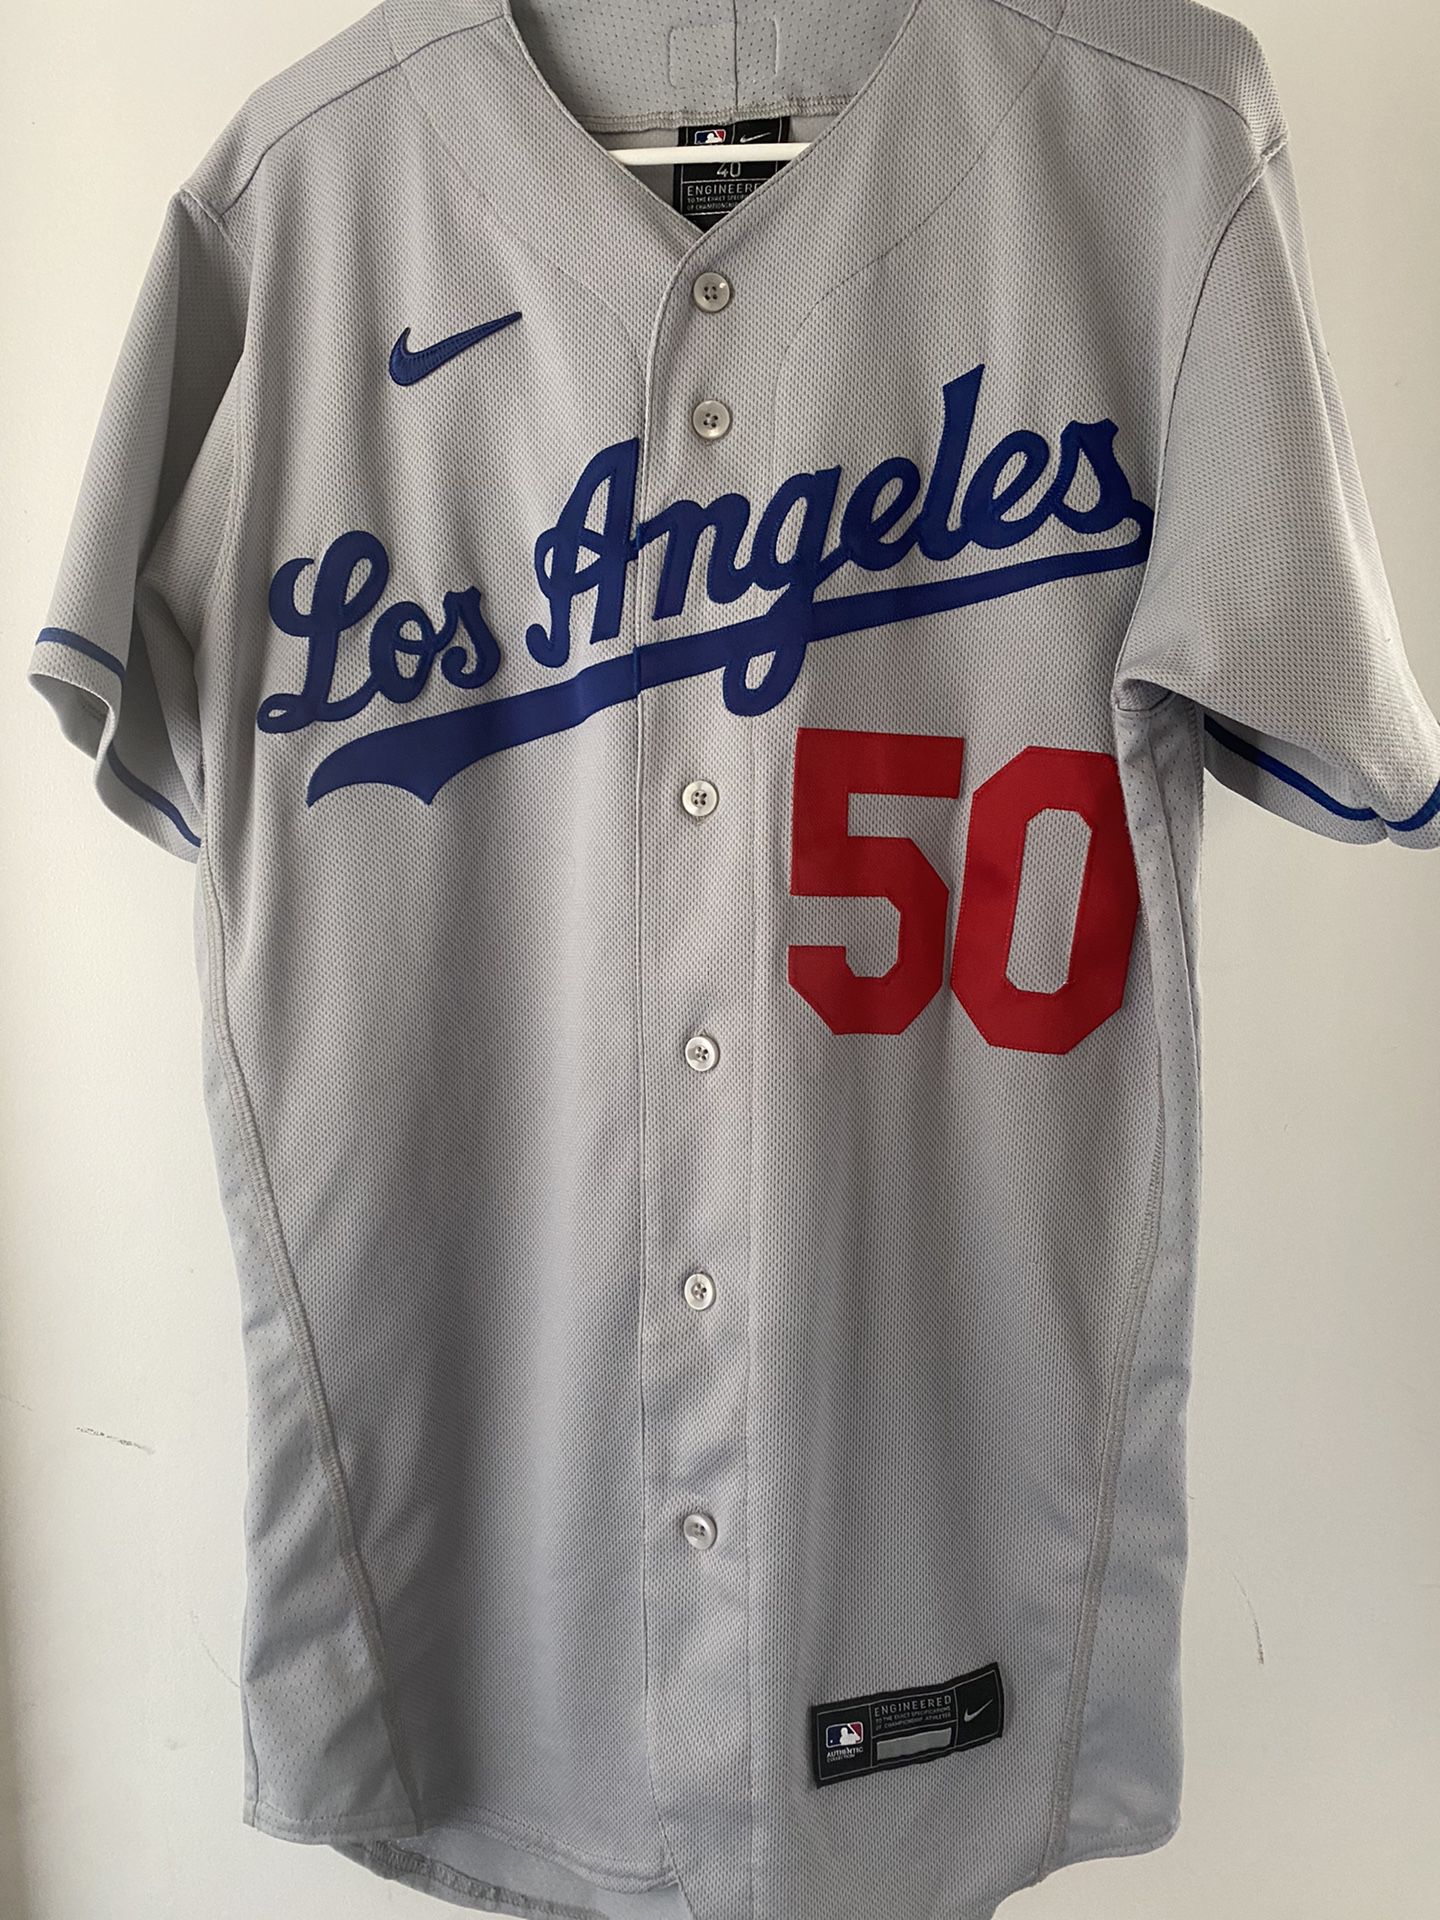 Authentic Mookie Betts jersey for Sale in Riverside, CA - OfferUp